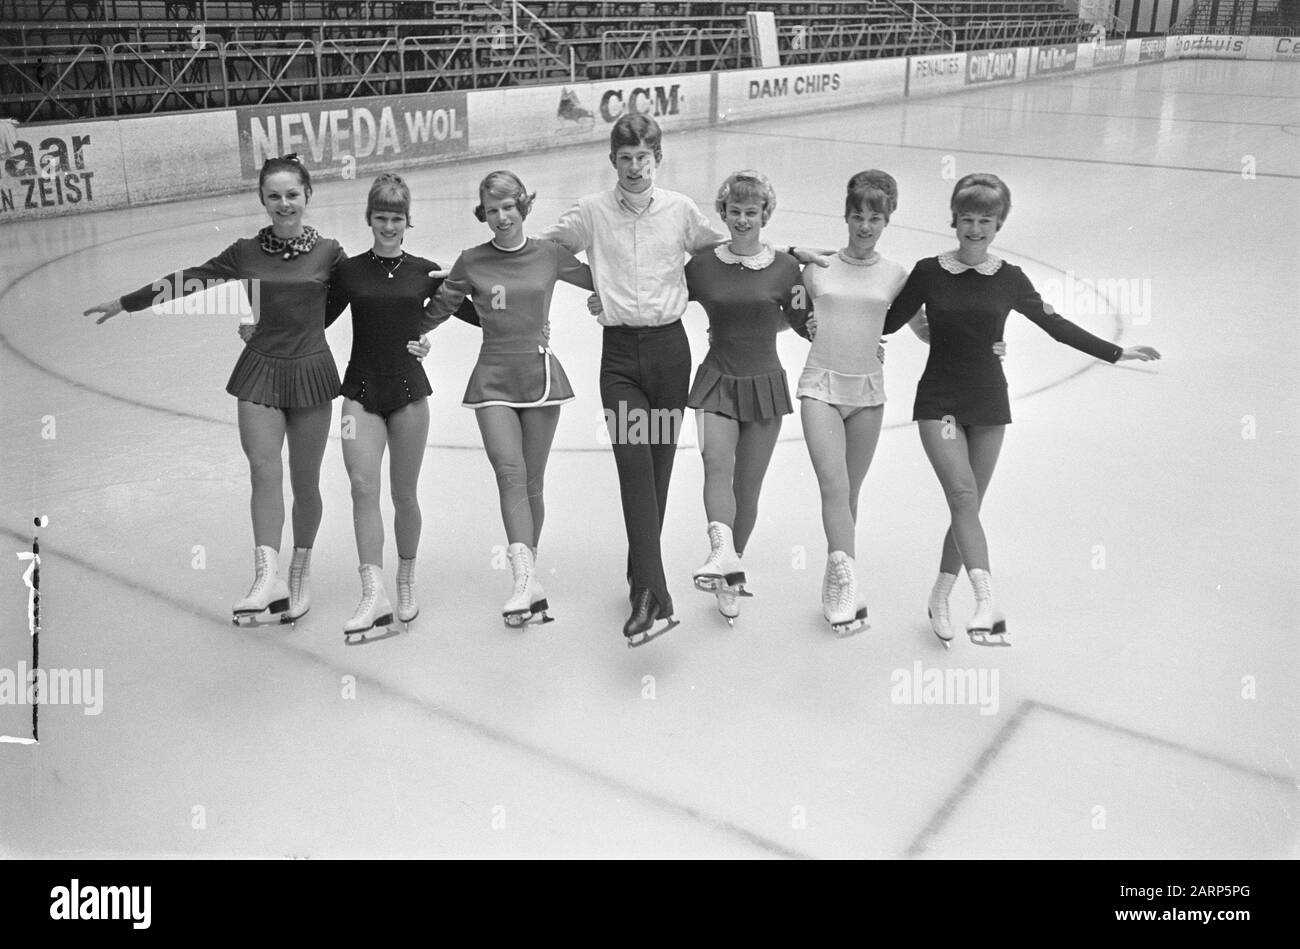 Dutch Figure Skating Championships 1967 at the Hokij (Houtrusthallen) in The Hague  V.l.n.r. the participants Anneke Heyt, Willy de Zoete, Marie Jouwstra, Arnoud Hendriks, Rieneke Zenijk, Anneke Roel and Astrid Feiertag Annotation: Arnoud Hendriks was the only male participant Date: March 15, 1967 Location: Den Haag, Zuid-Holland Keywords: ice dancing, figure skating, sport Person name: Feiertag, Astrid, Hendriks, Arnoud, Heyt, Anneke, Jouwstra, Marie, Roel, Anneke, Zeneke, Zoet, Willy de Stock Photo